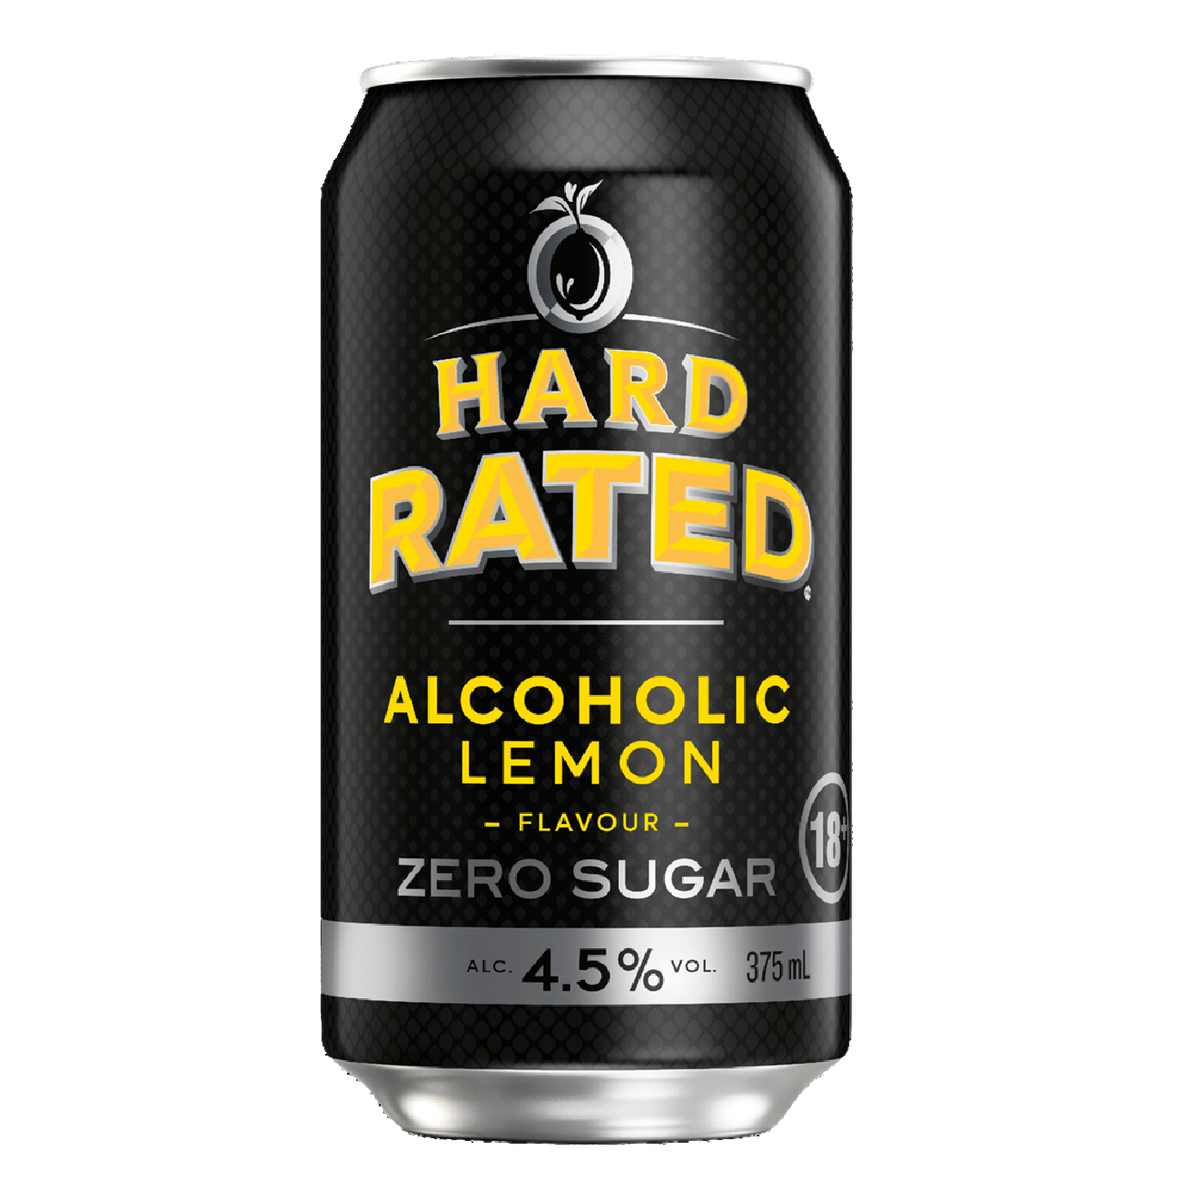 Hard Rated Alcoholic Lemon 375ml Can Case of 30